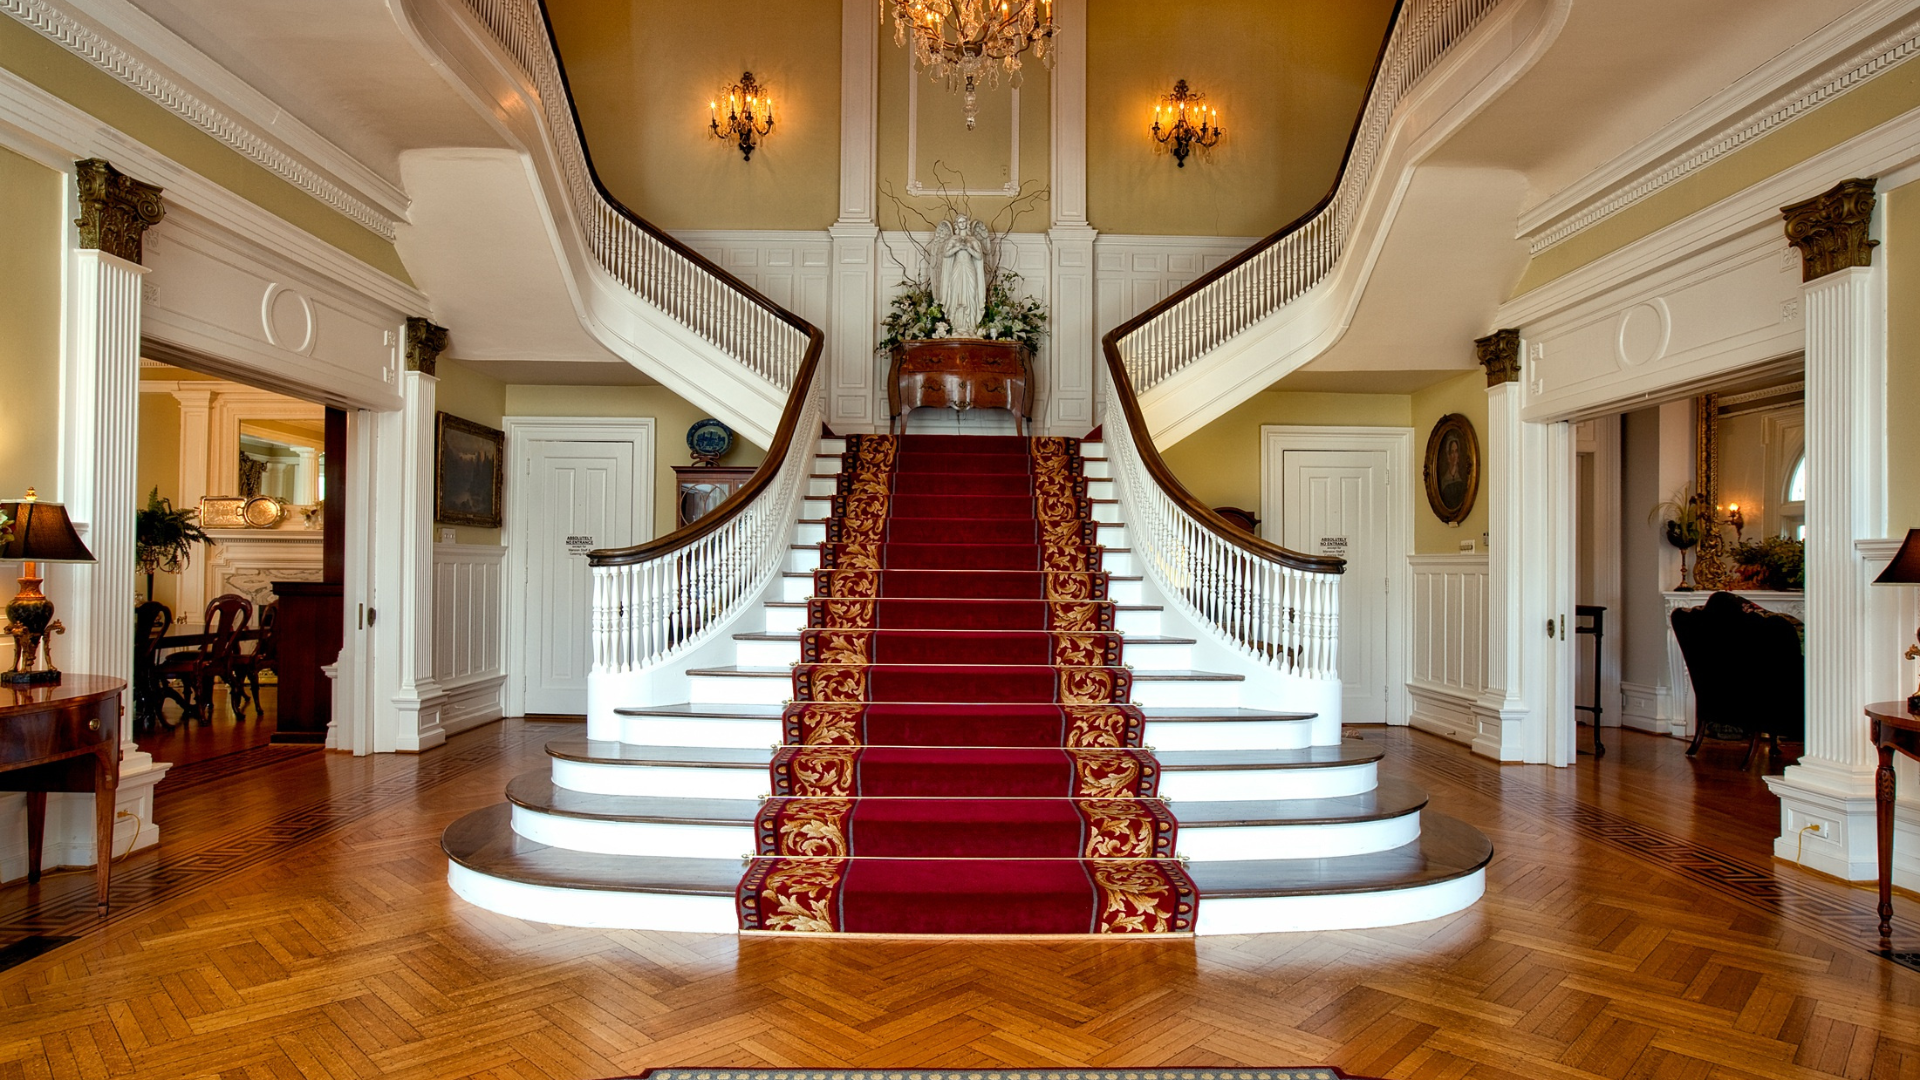 Owning the Best House in the Neighborhood - Foyer with grand staircase with carpeted runner